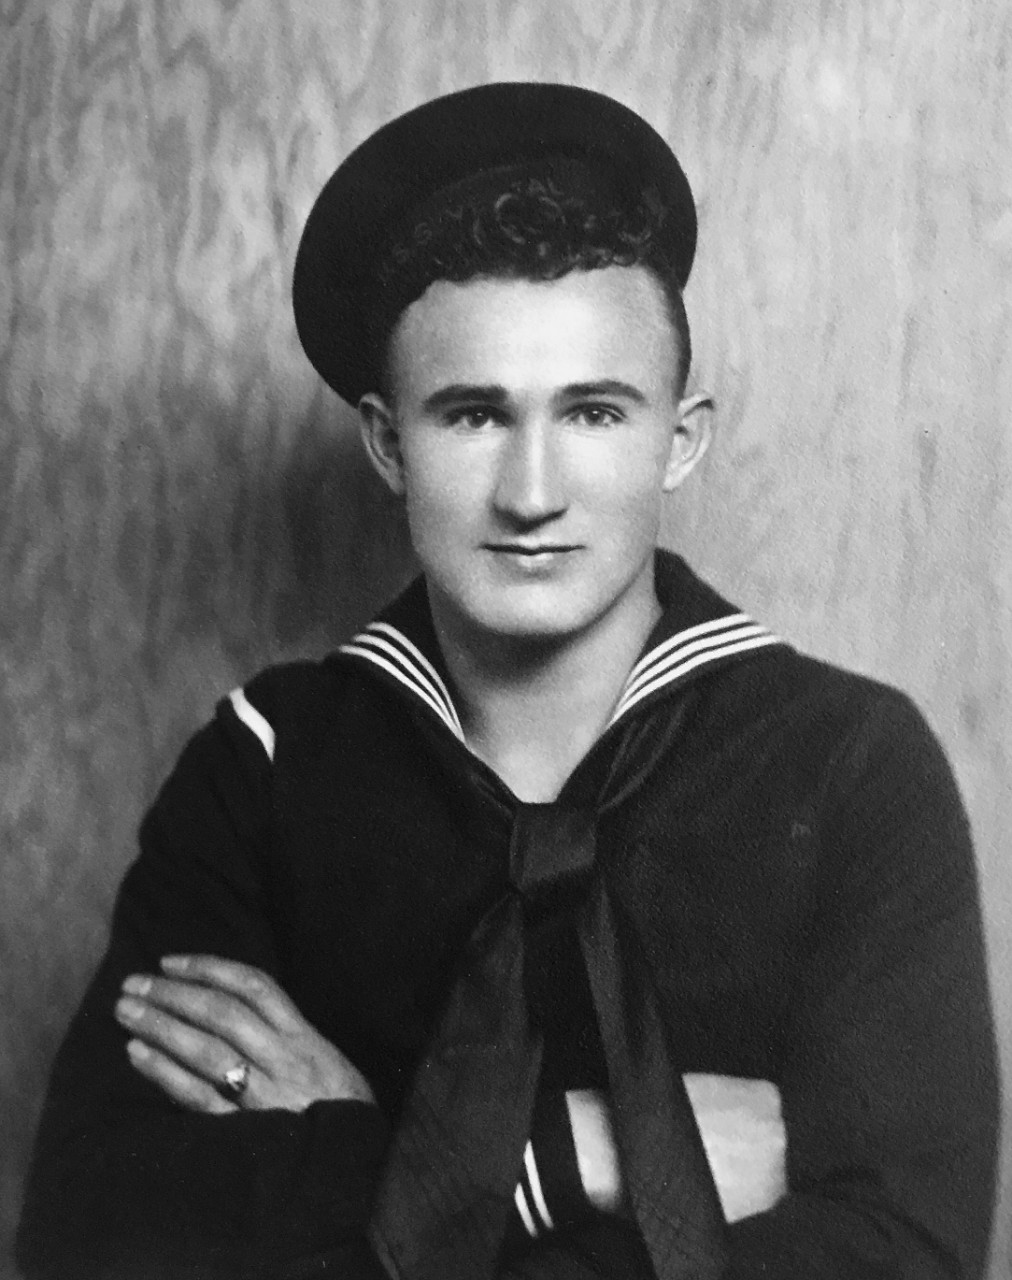 An undated photo of Chief Boatswain's Mate Joseph L. George from earlier in his career. After enlisting in 1935, George was assigned to the repair ship USS Vestal which was moored alongside USS Arizona (BB 39) when the Japanese attack began on De...